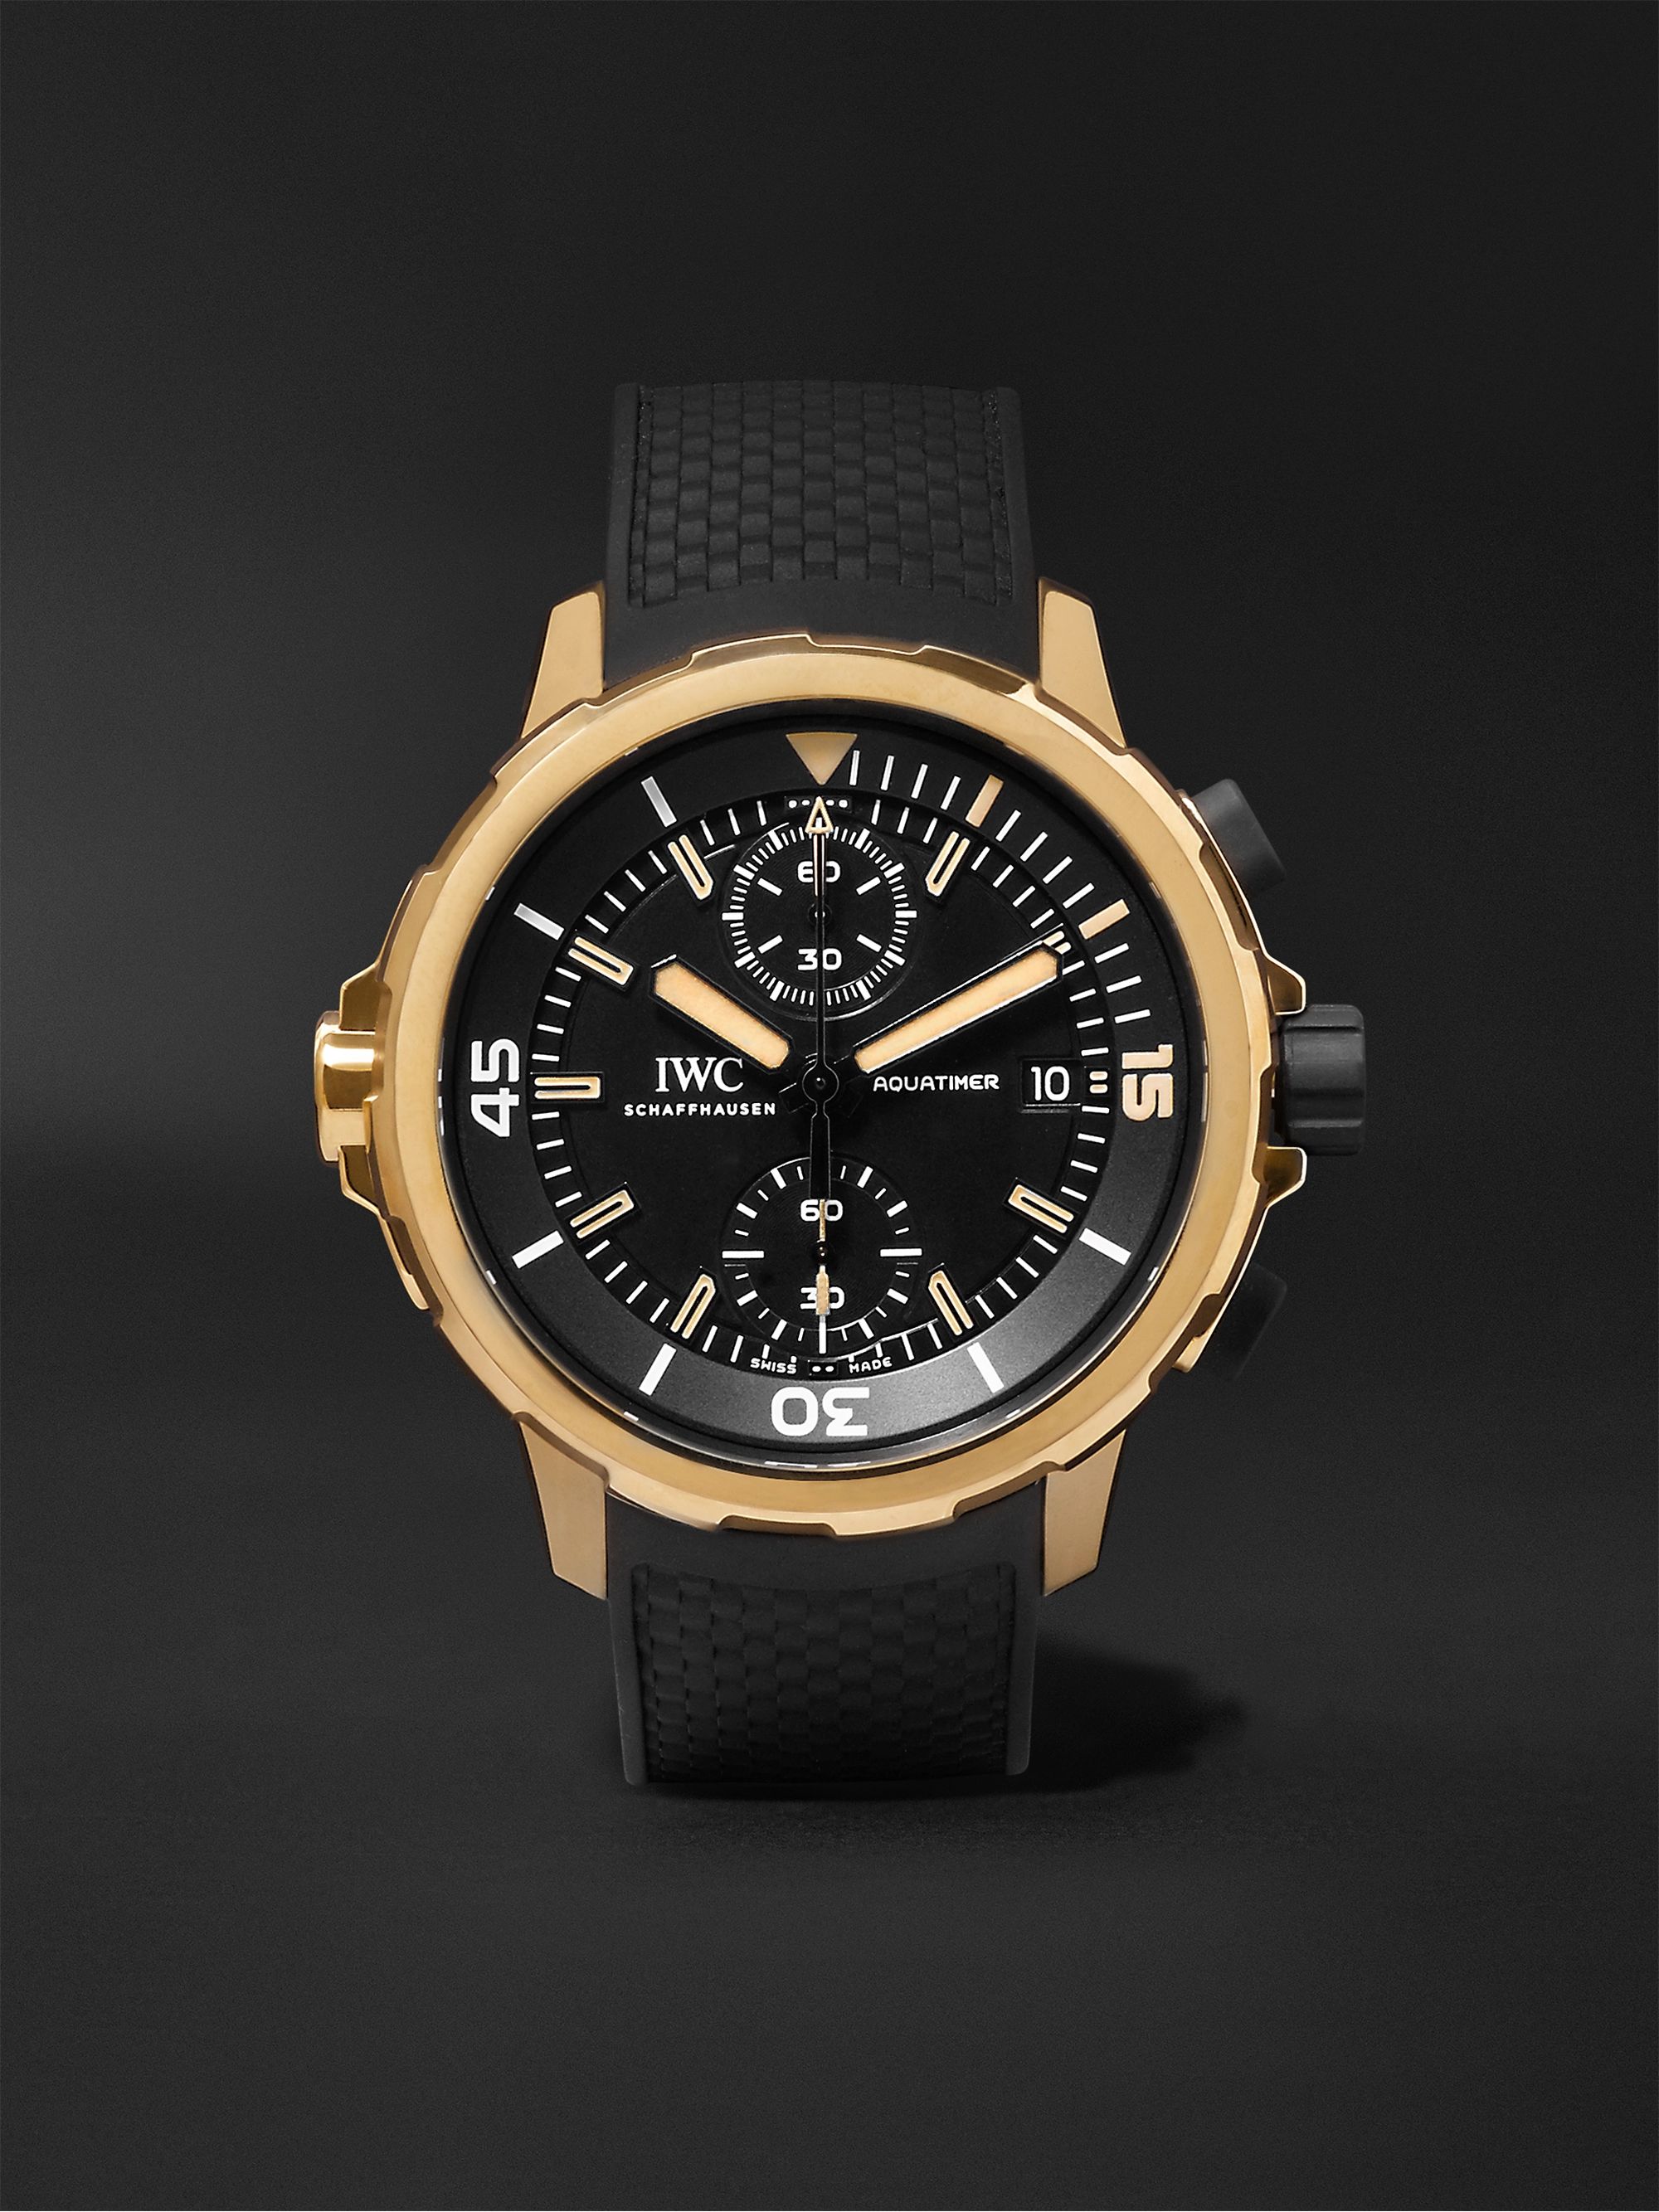 IWC SCHAFFHAUSEN Aquatimer Expedition Charles Darwin Automatic Chronograph  44mm Bronze and Rubber Watch, Ref. No. IW379503 | MR PORTER